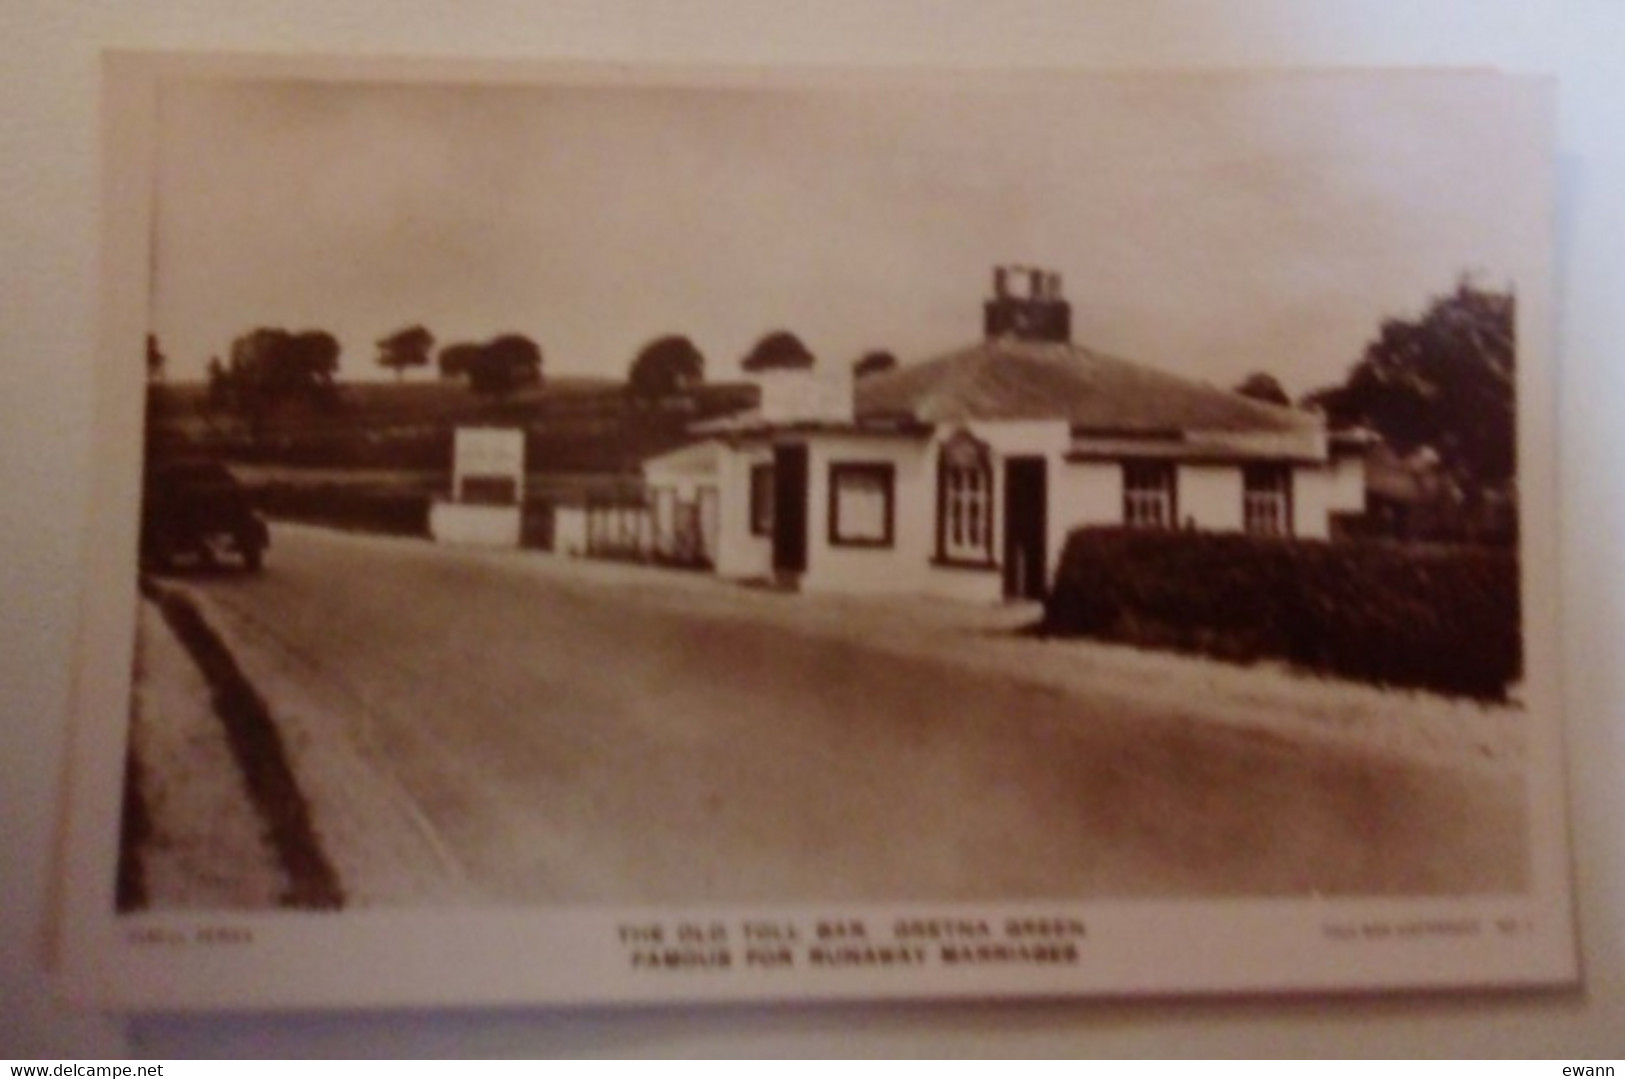 Ecosse - Carte Postale Ancienne - The Old Toll Bar, Gretna Green, Famous For RunawayMarriages - Dumfriesshire